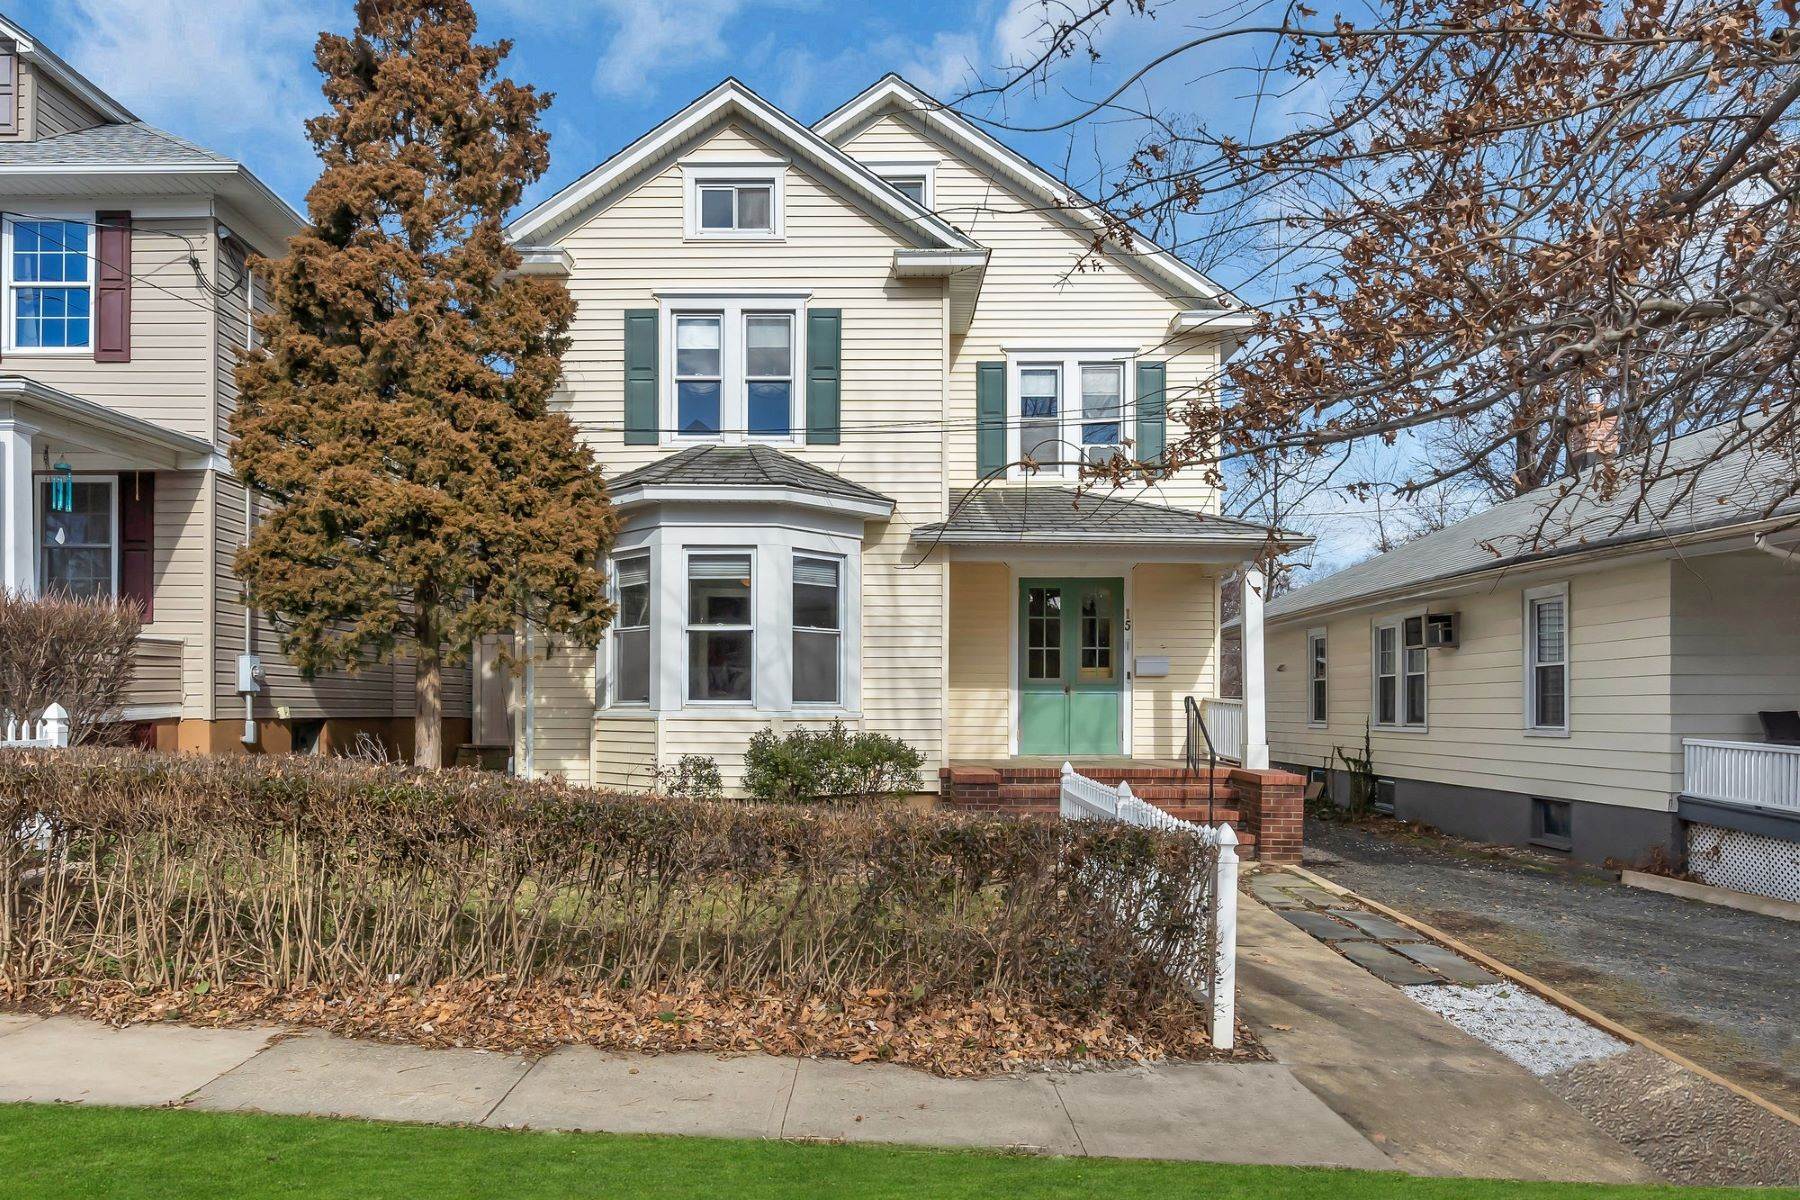 Property for Sale at Charming Colonial in Freehold 15 Bennett Street Freehold, New Jersey 07728 United States